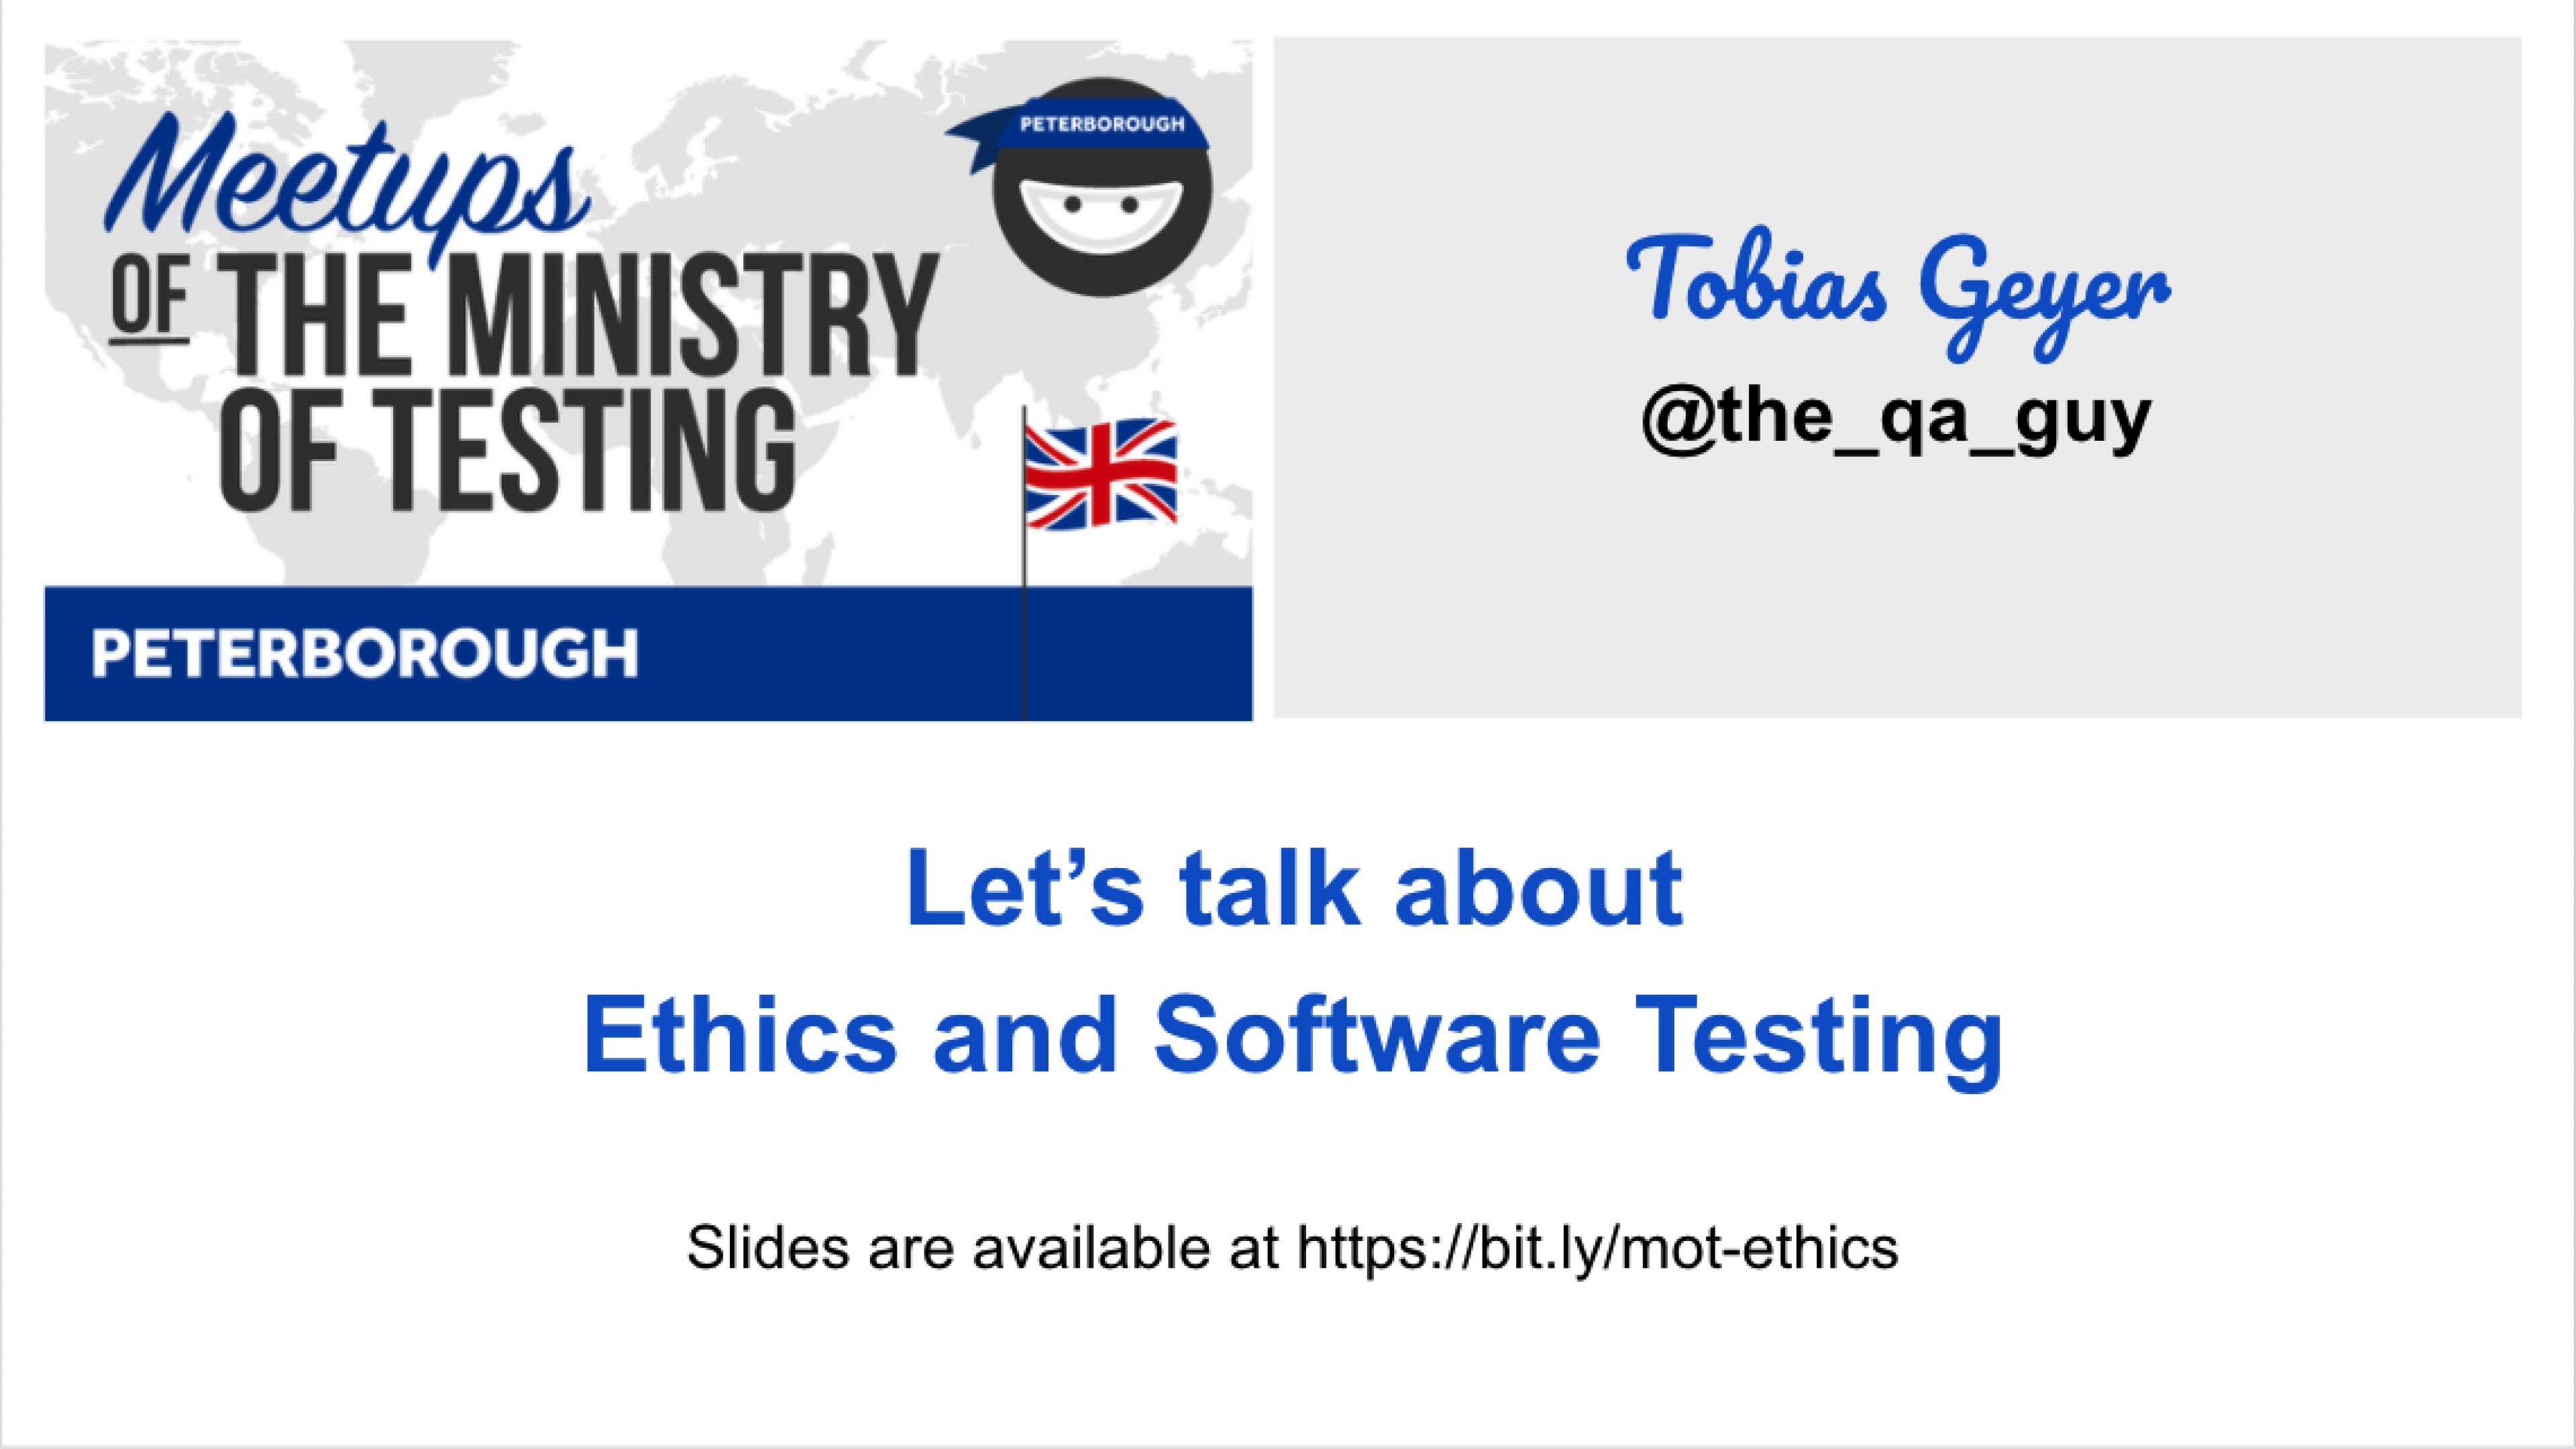 Let's talk about ethics and software development - Tobias Geyer